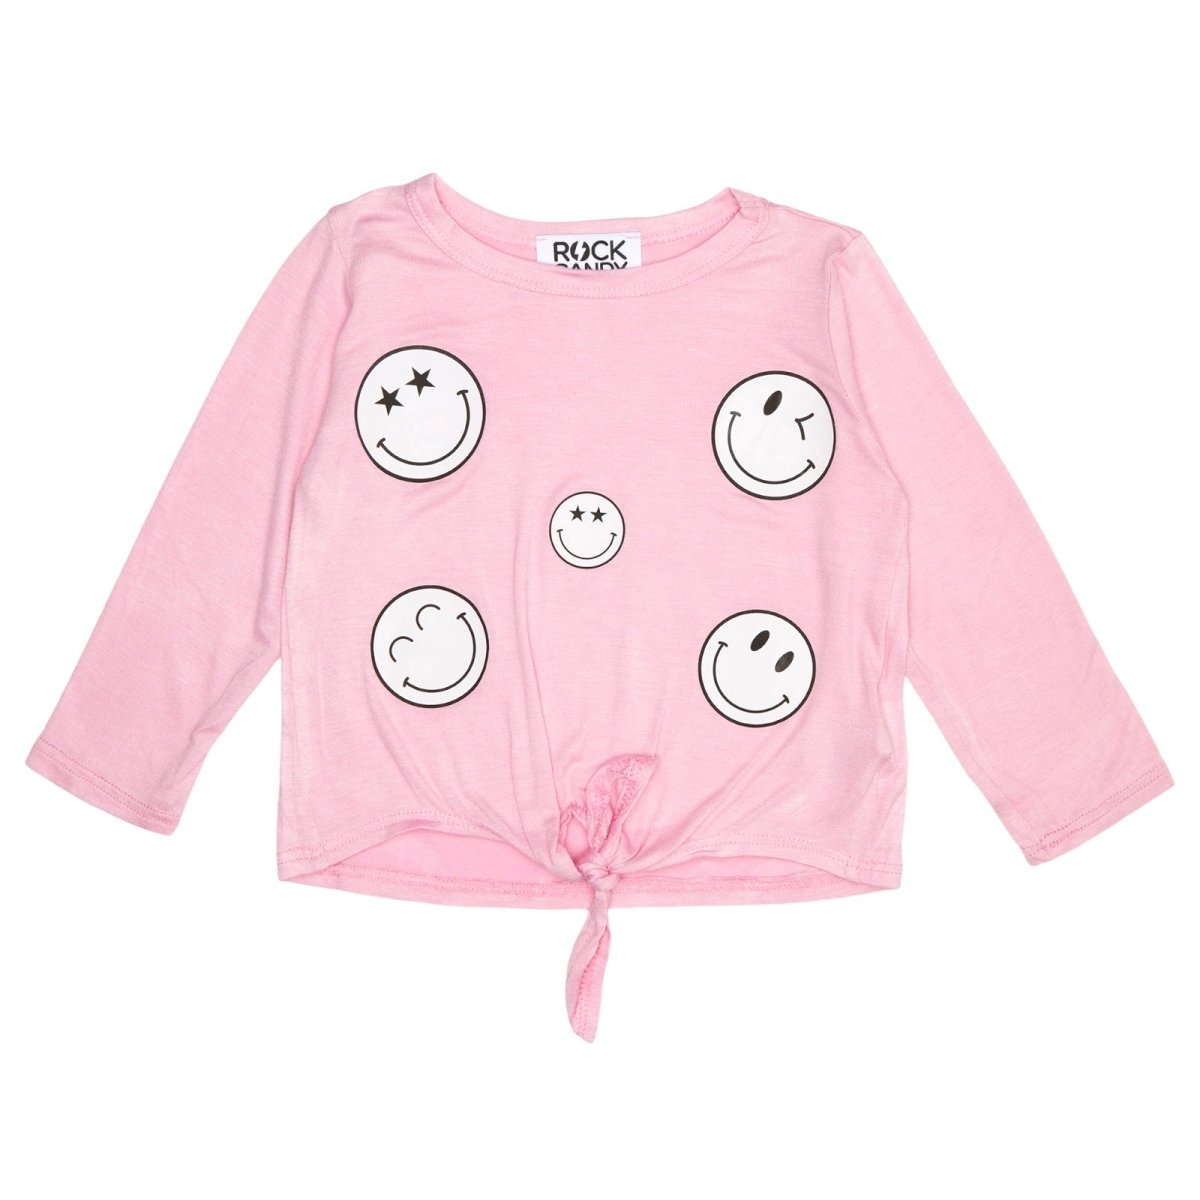 WINK SMILEY FACE LONG SLEEVE TSHIRT WITH TIES - ROCK CANDY